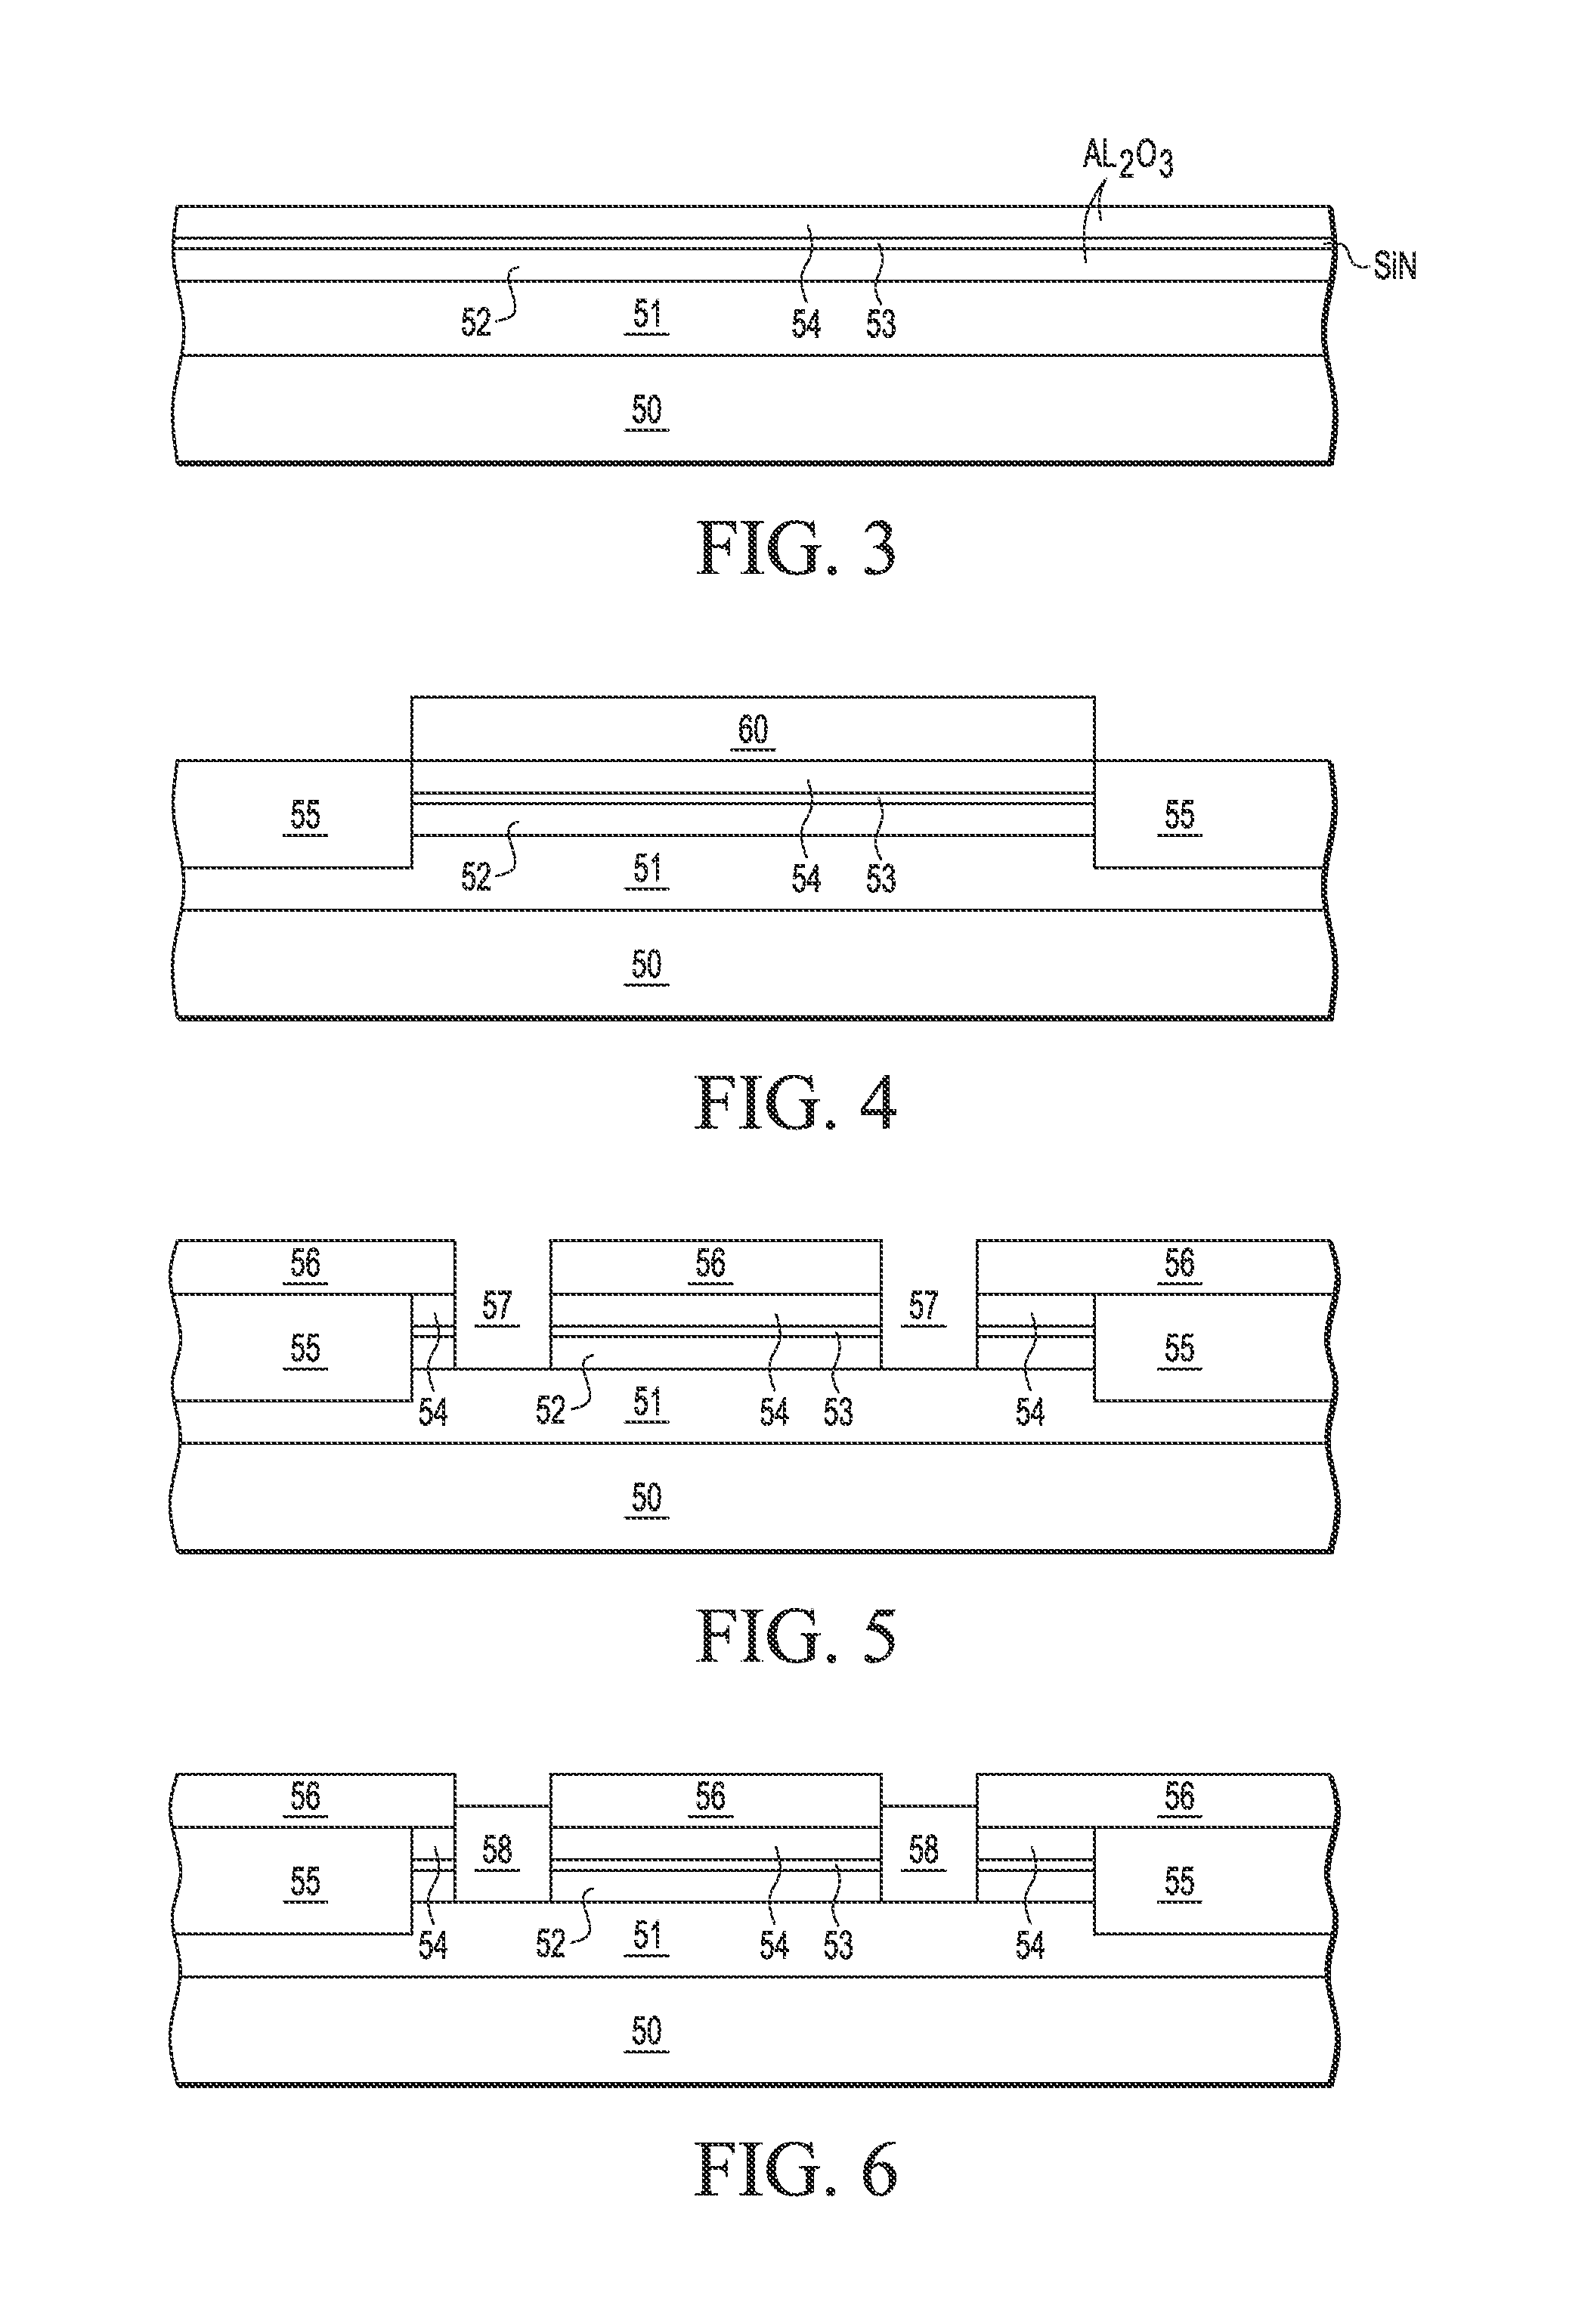 Method for Improving E-Beam Lithography Gate Metal Profile for Enhanced Field Control